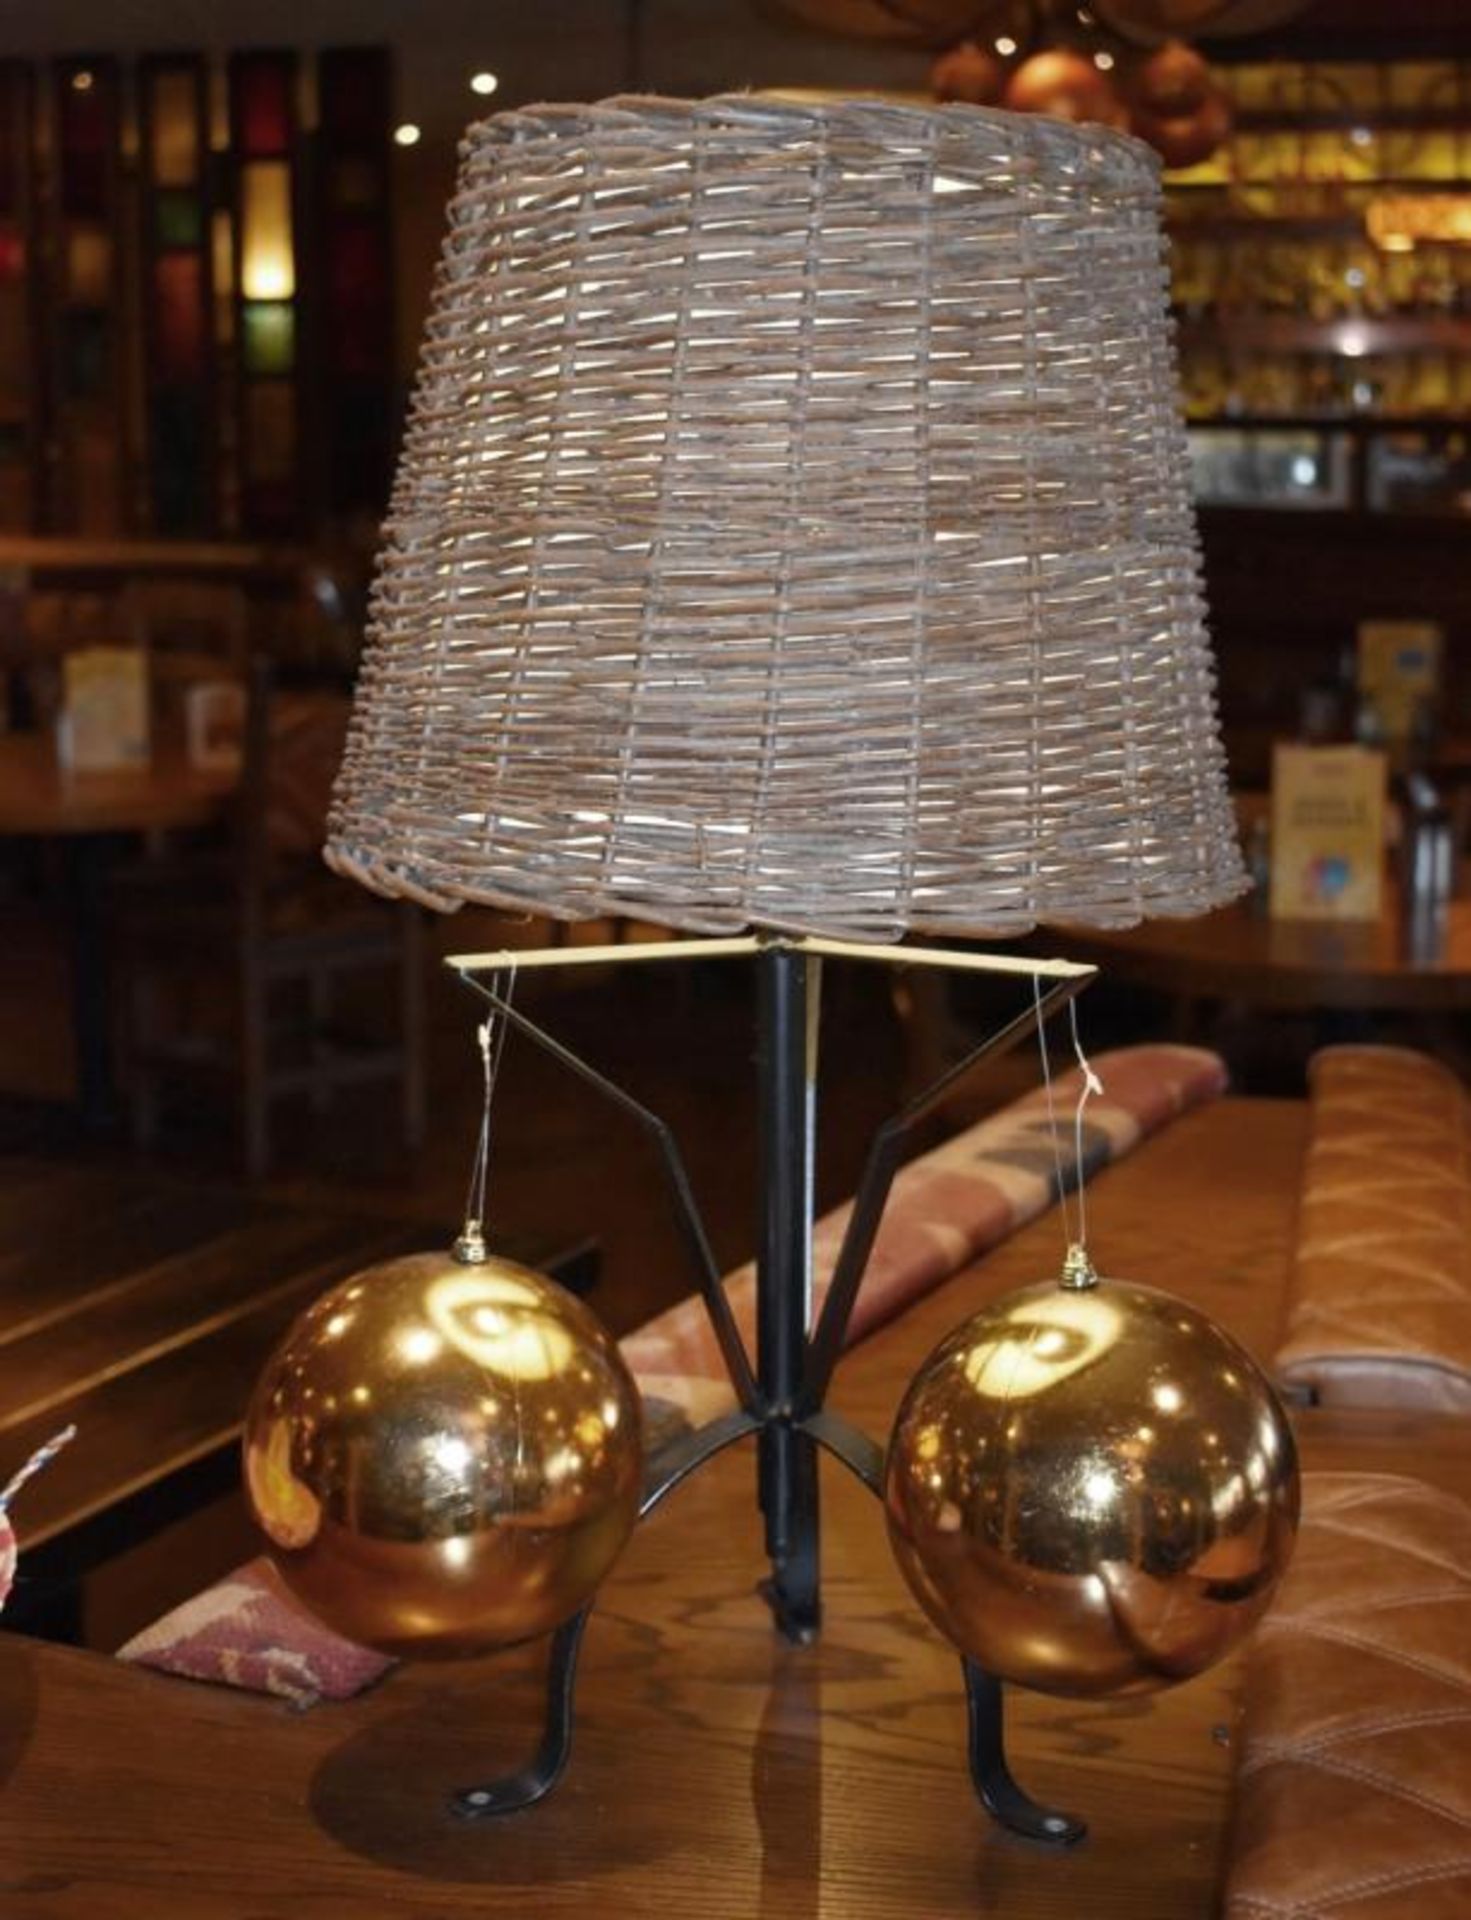 2 x Table Lamps With Rustic Basket Shades Height 63 cms - CL461 - Location: Altrincham WA14